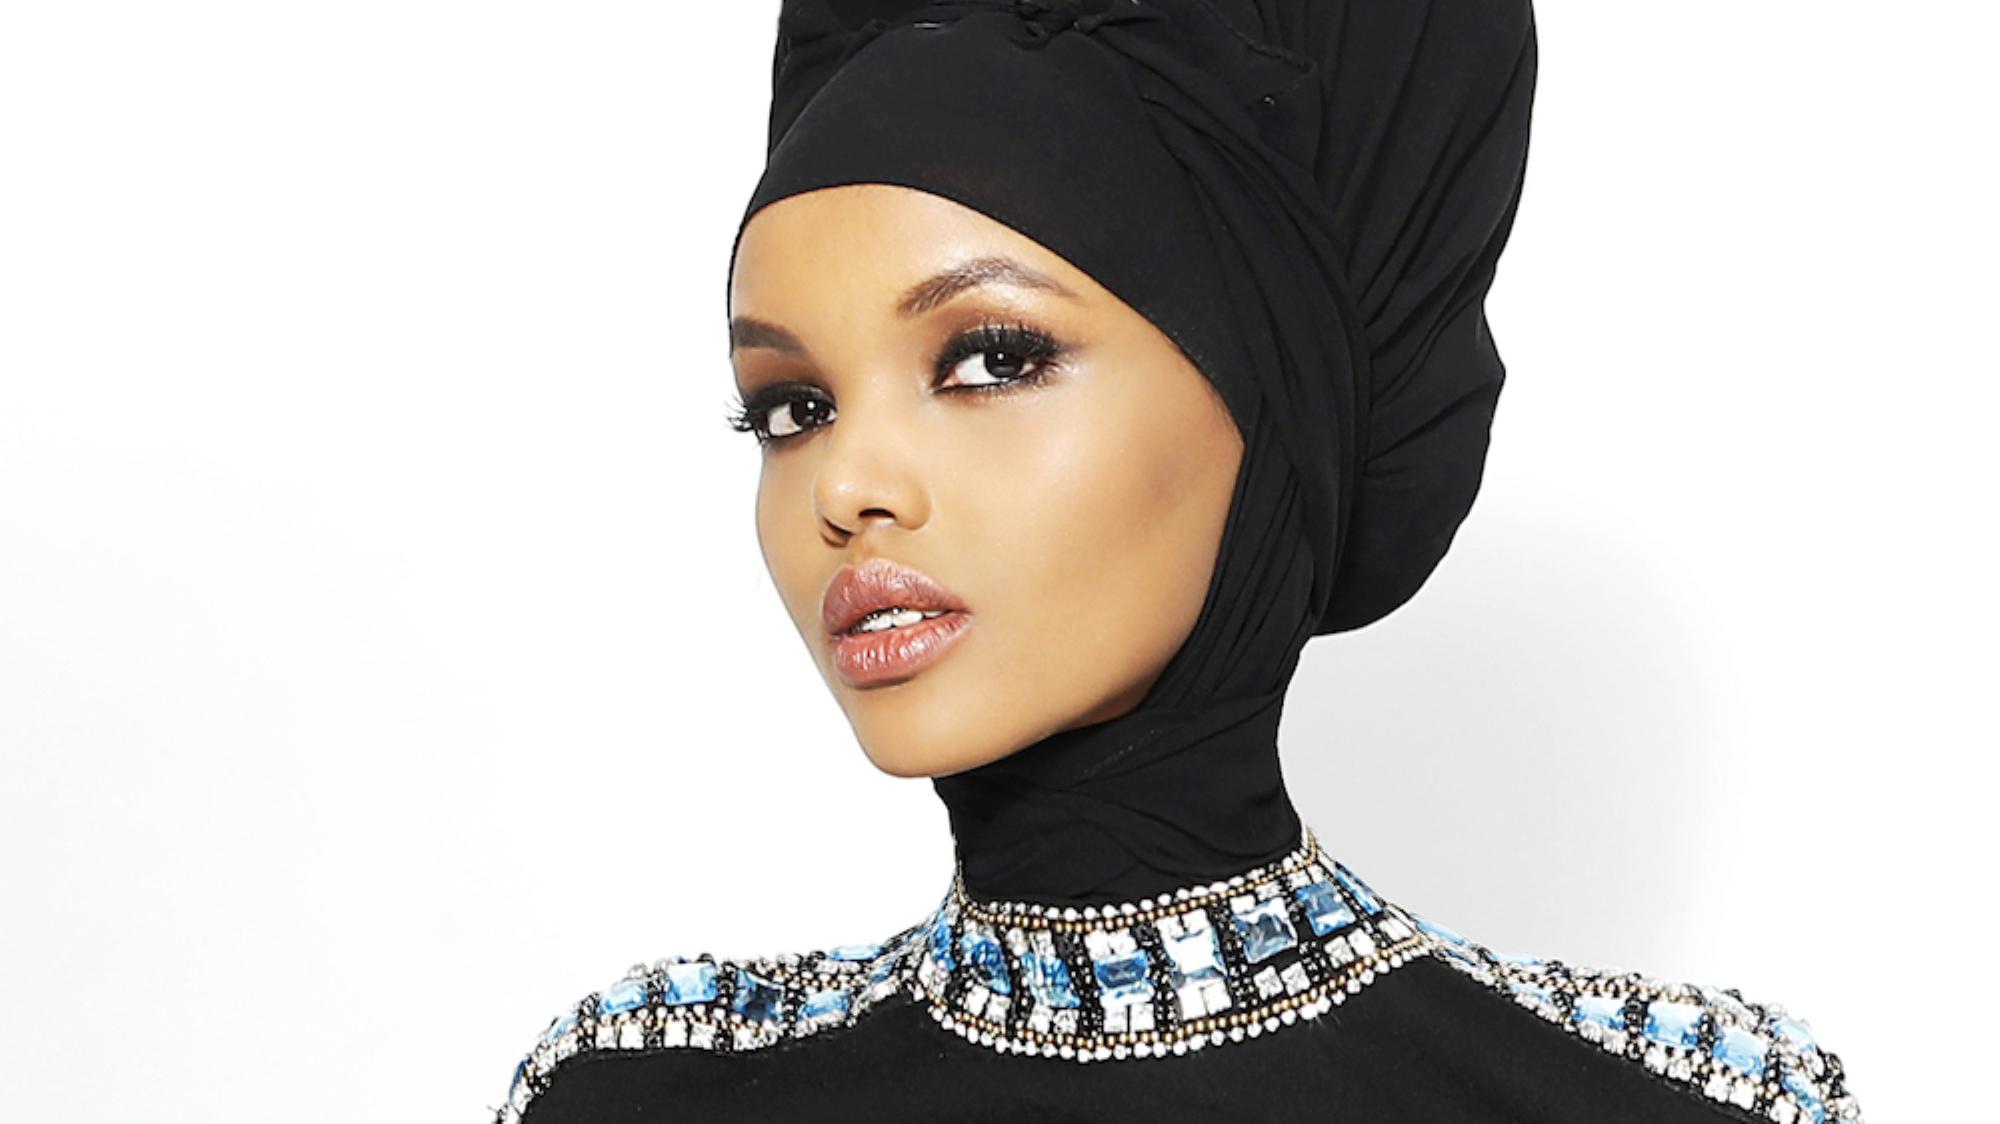 Meeting Halima: Muslim woman of colour taking the fashion world by storm